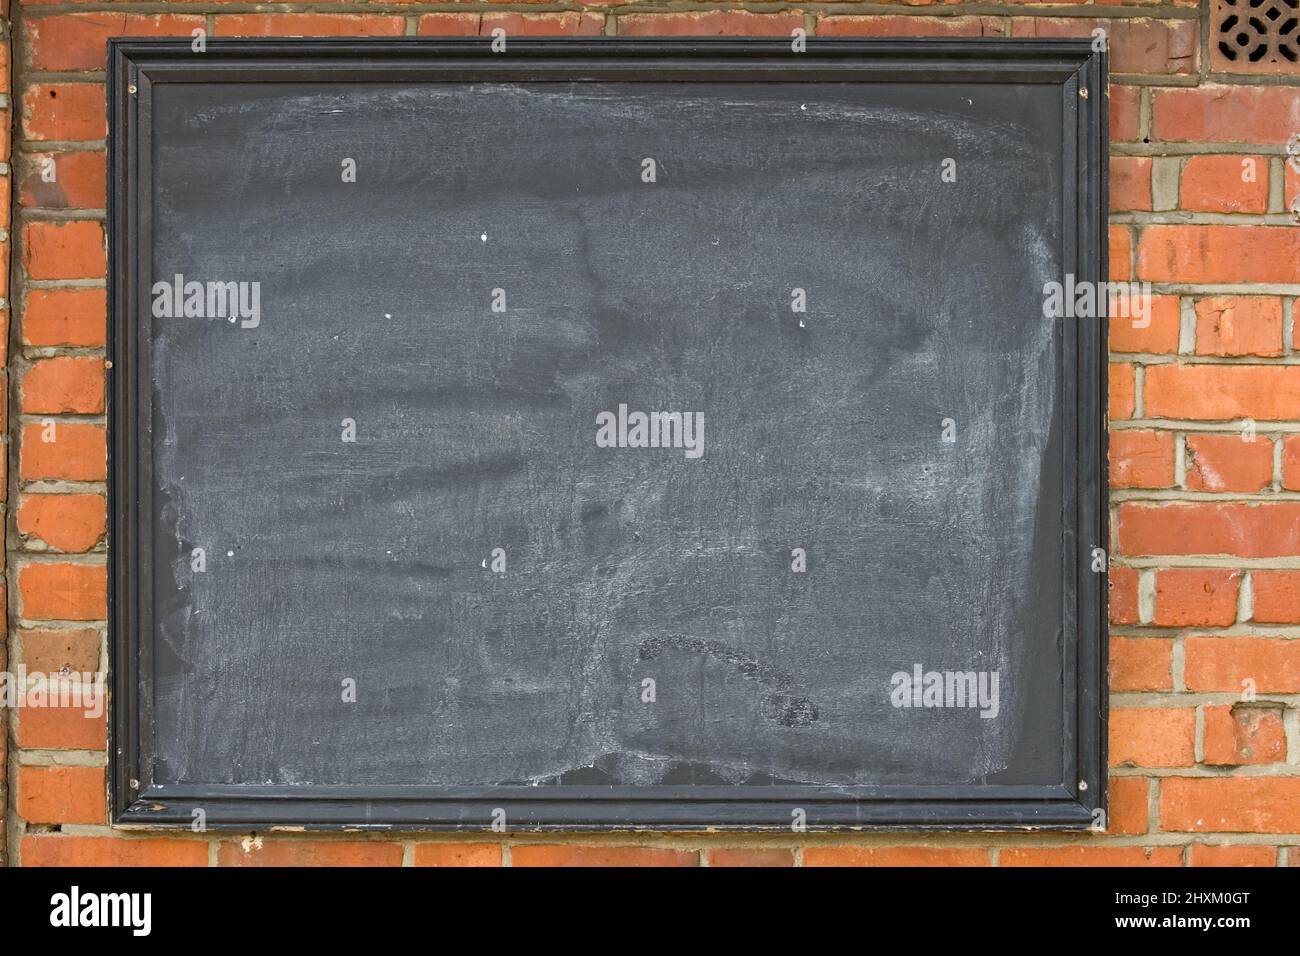 Pub chalk board to advertise attractions etc.  Blank copy space for addition of captions, text. Stock Photo